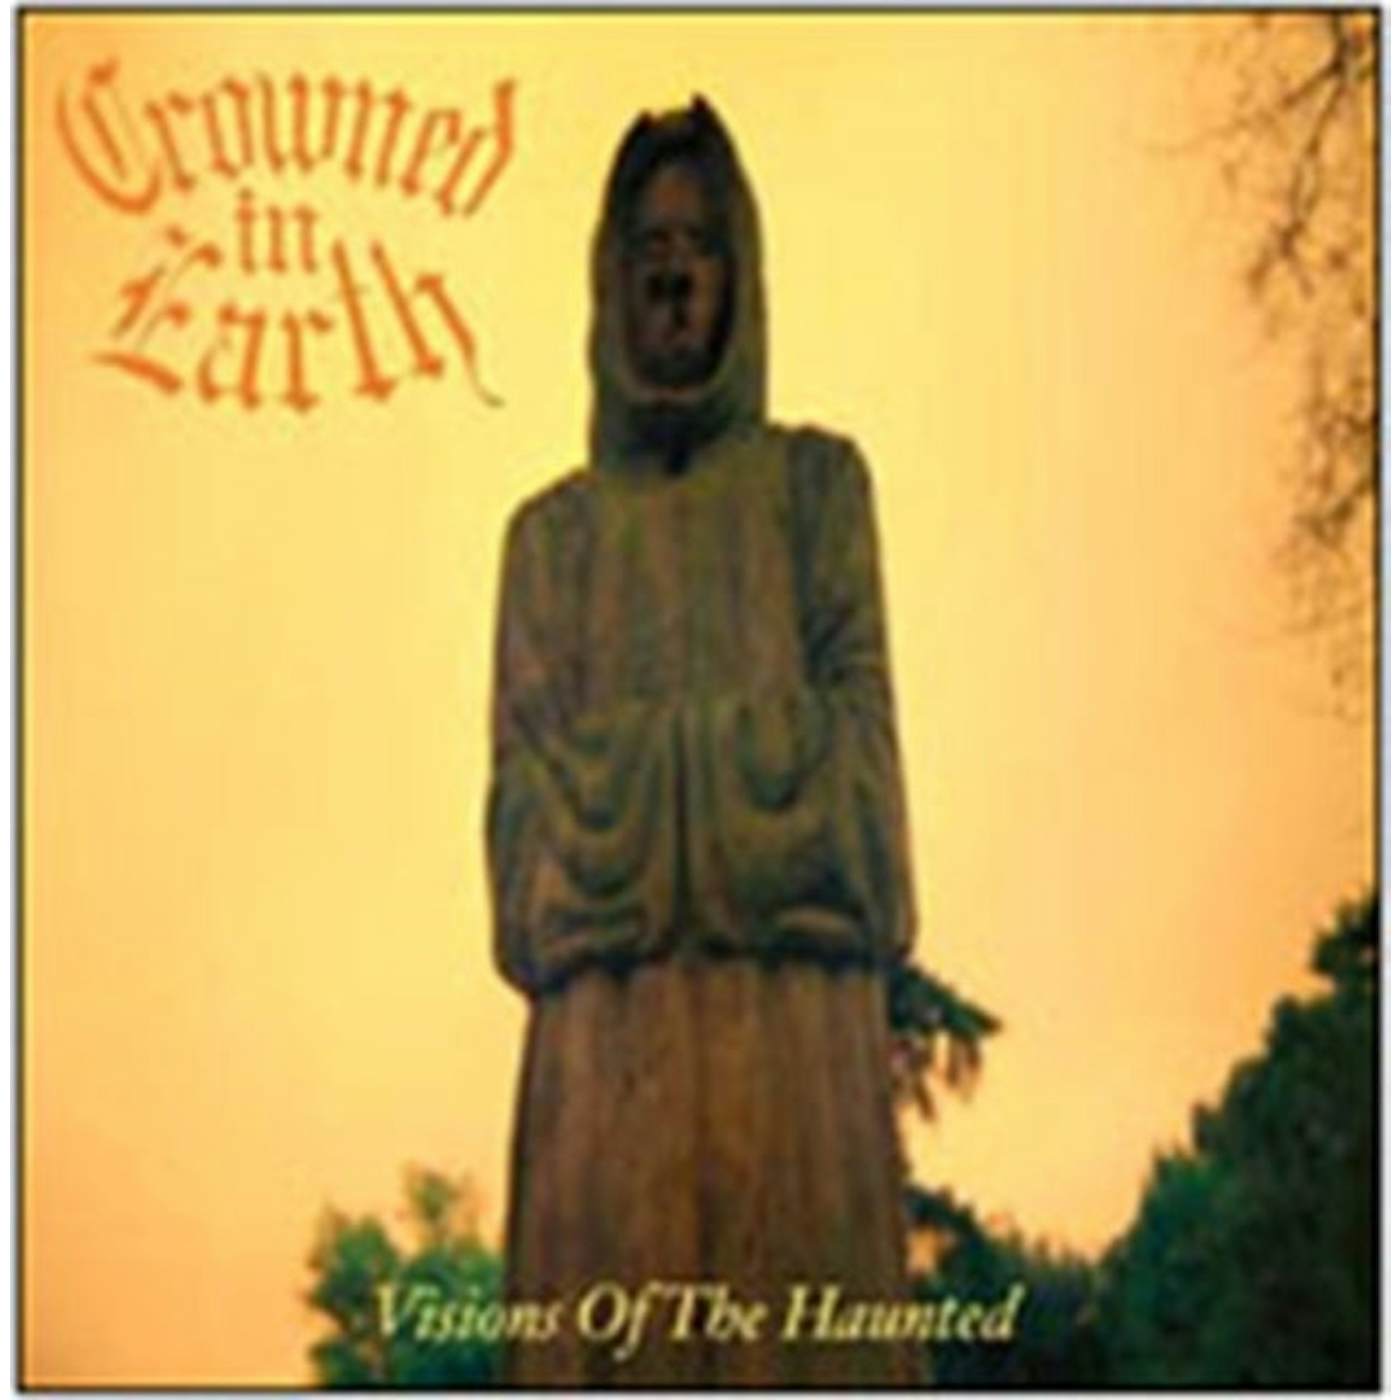 Crowned In Earth CD - Visions Of The Haunted